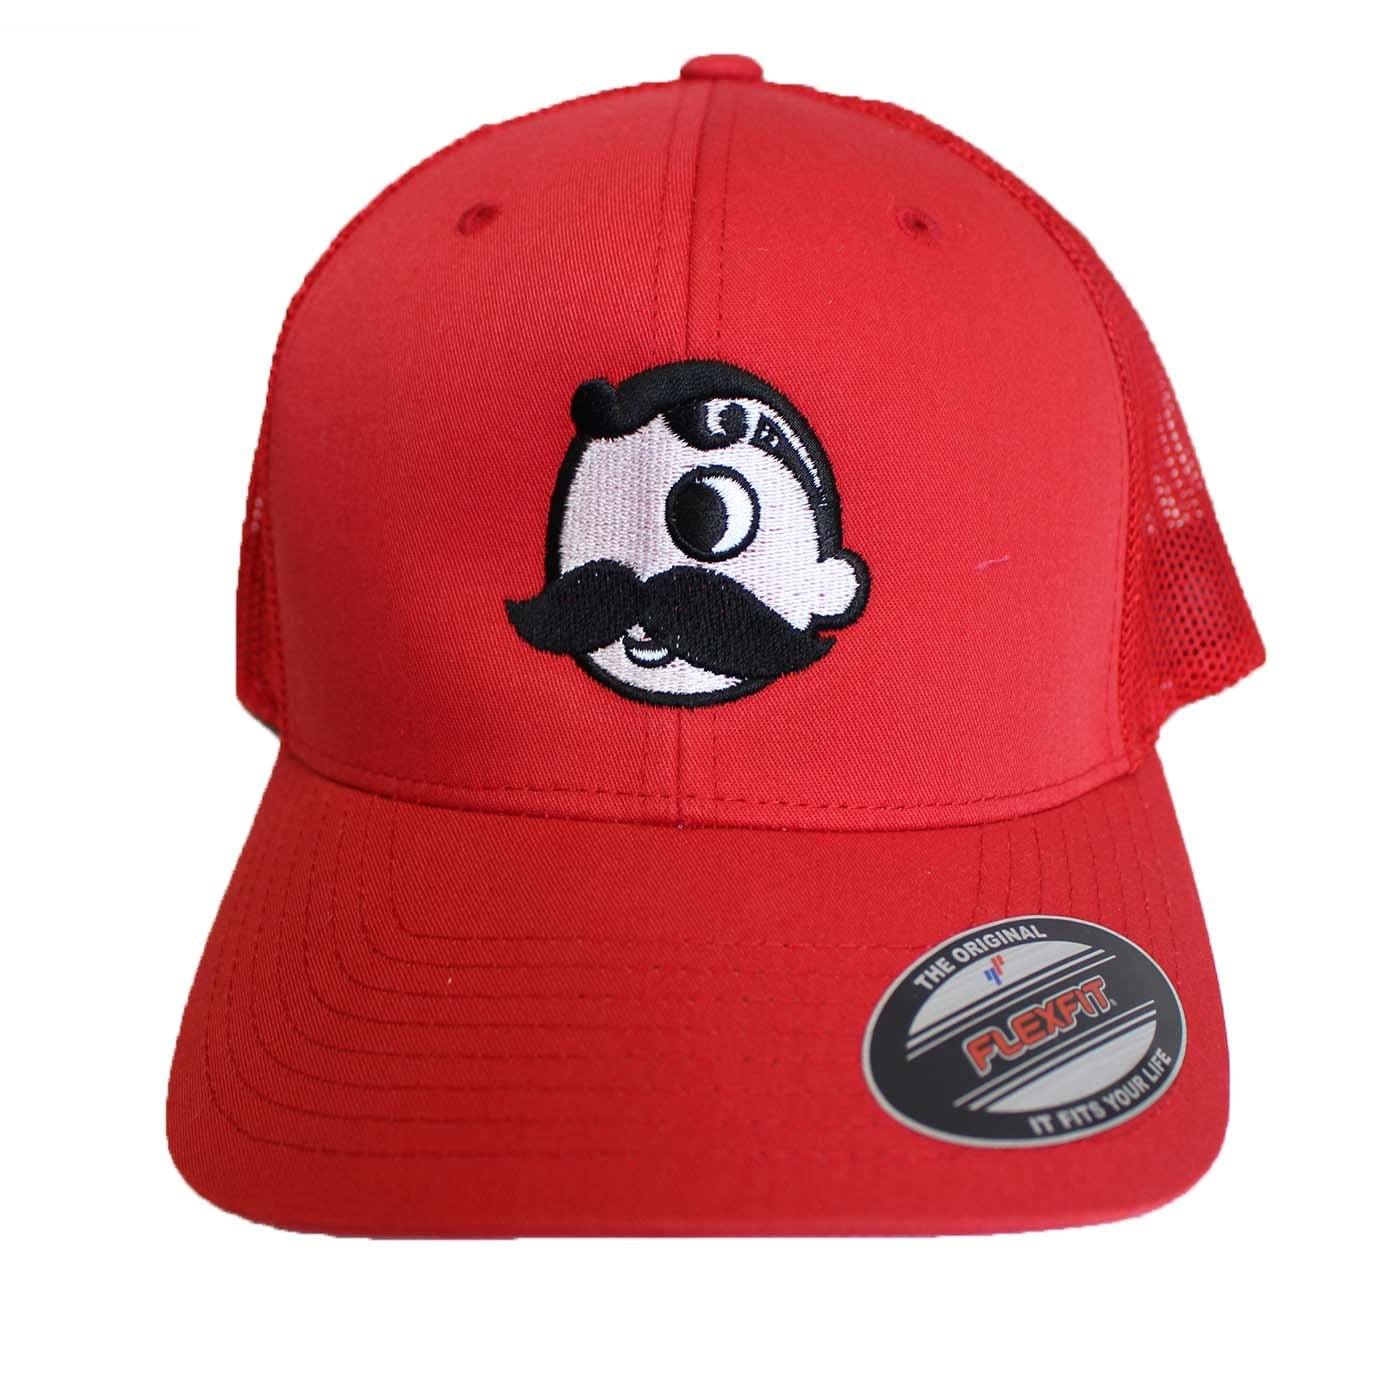 Natty Boh Logo (Red) / Trucker Hat - Route One Apparel